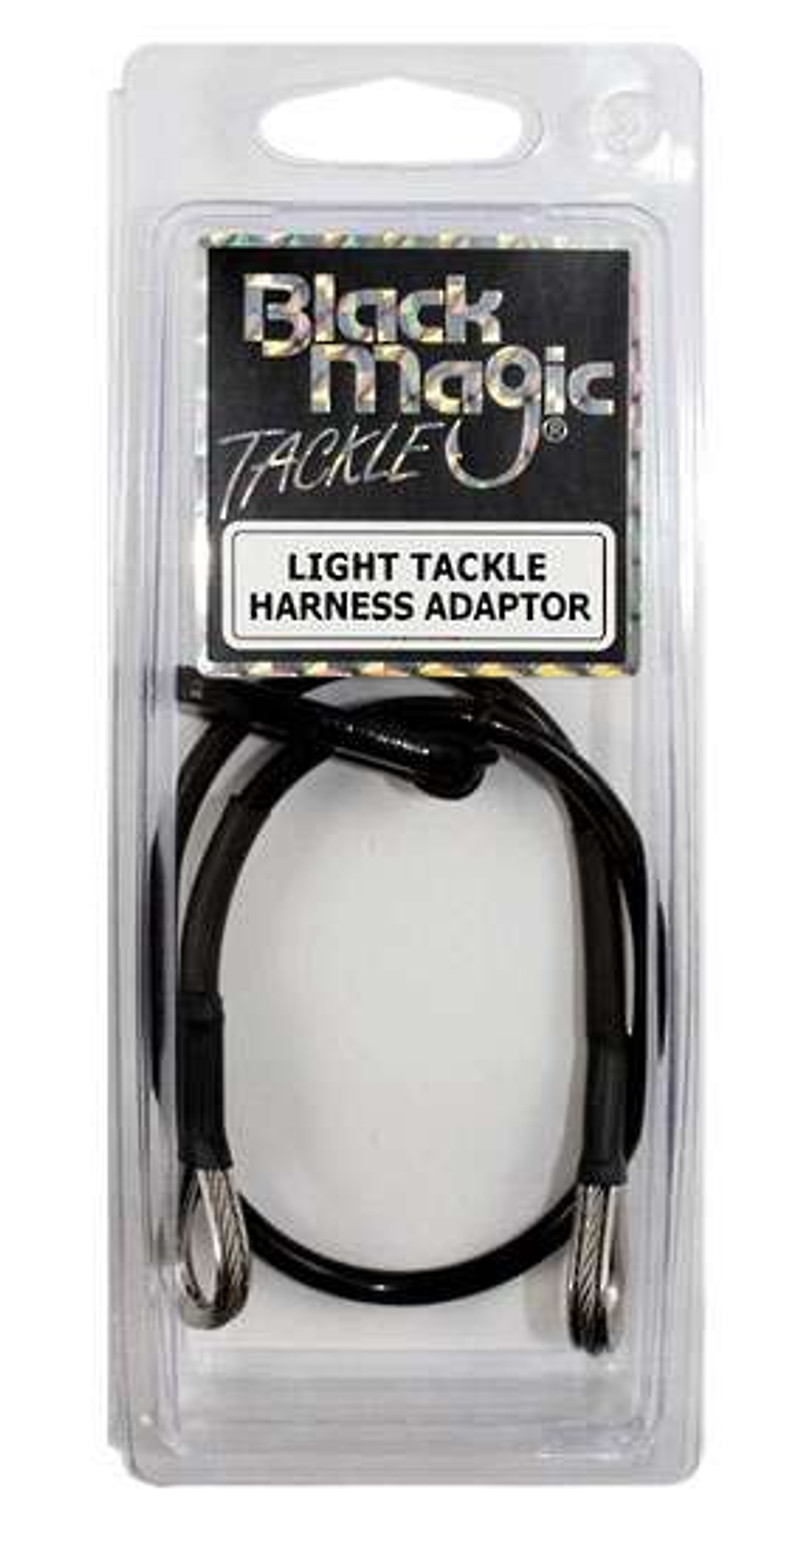 https://cdn11.bigcommerce.com/s-palssl390t/images/stencil/800w/products/31920/50124/black-magic-tackle-light-tackle-harness-adapter__84211.1696873449.1280.1280.jpg